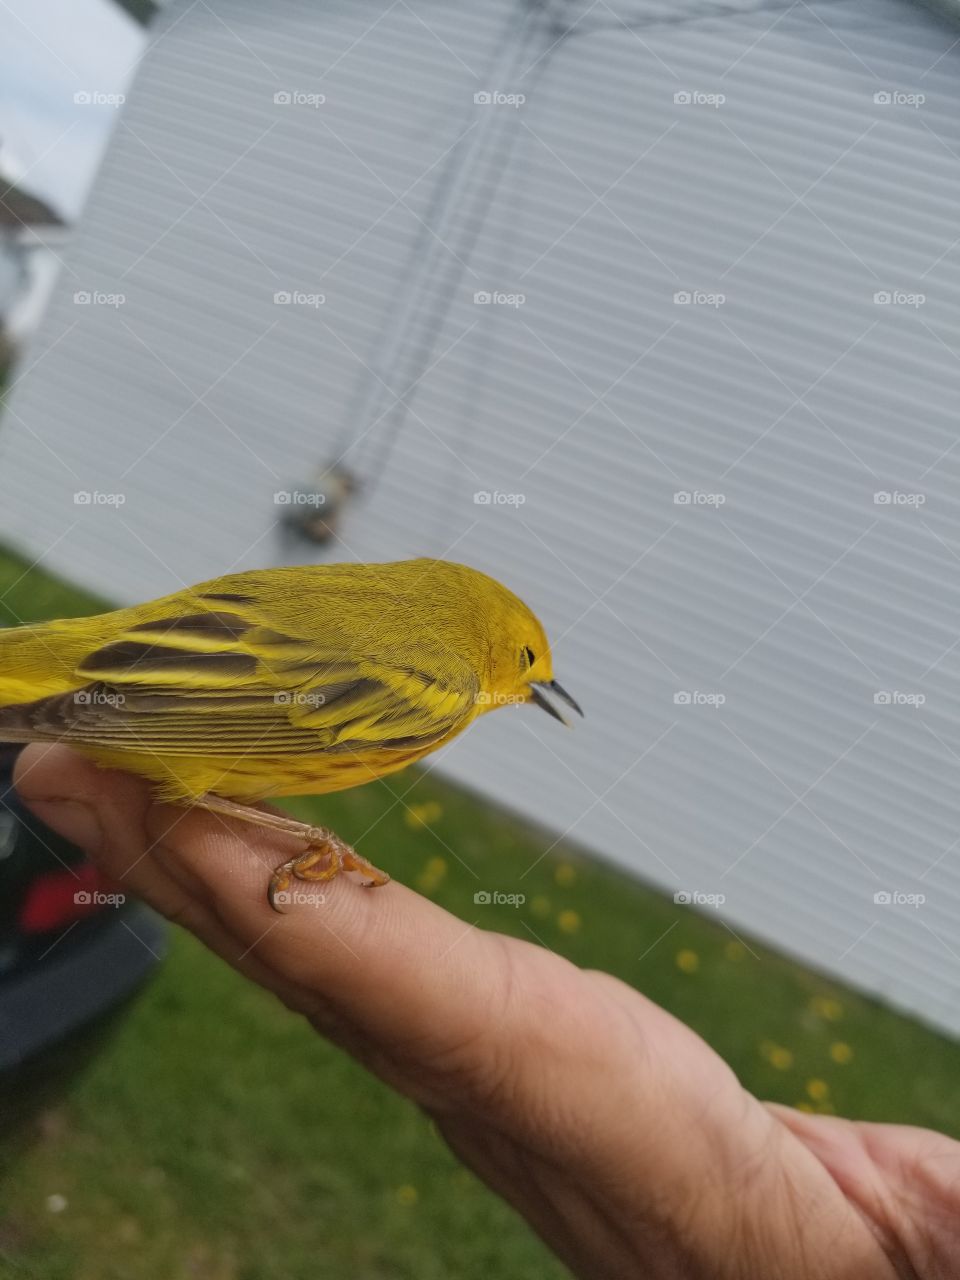 This little guy was drinking fermented apples and flew into our window, luckily he's okay so I grabbed a quick shot before sending him home